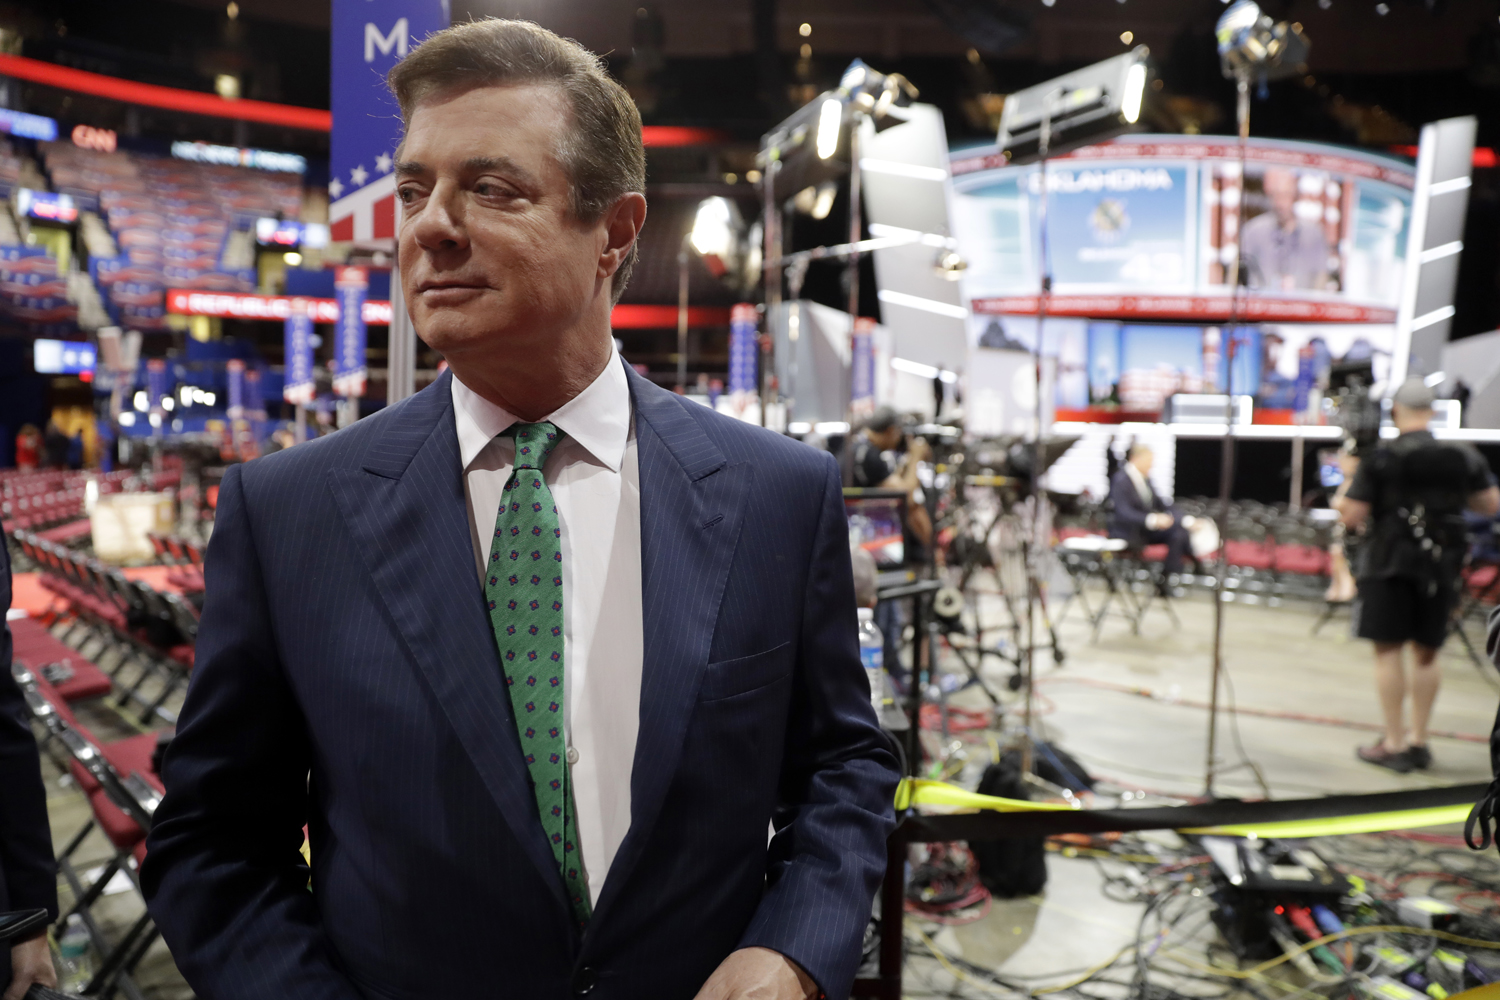 In this photo taken July 17, 2016, Paul Manafort talks to reporters on the floor of the Republican National Convention at Quicken Loans Arena in Cleveland. Lately, special prosecutor Robert Mueller has been ratcheting up pressure on Manafort. (Matt Rourke/AP)